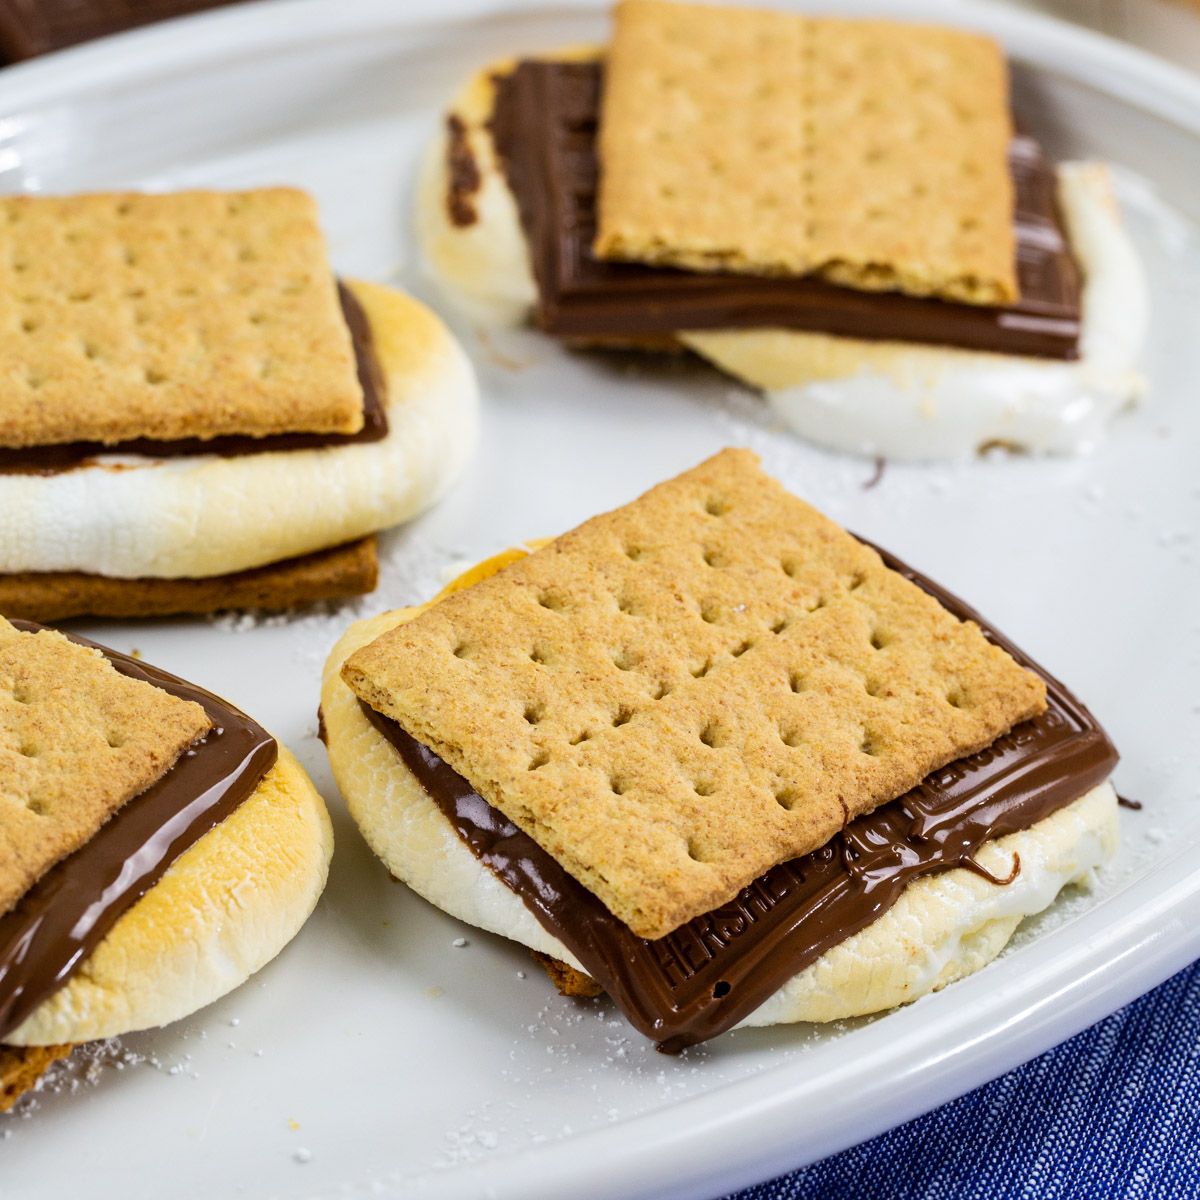 Air fryer S'mores on a plate.